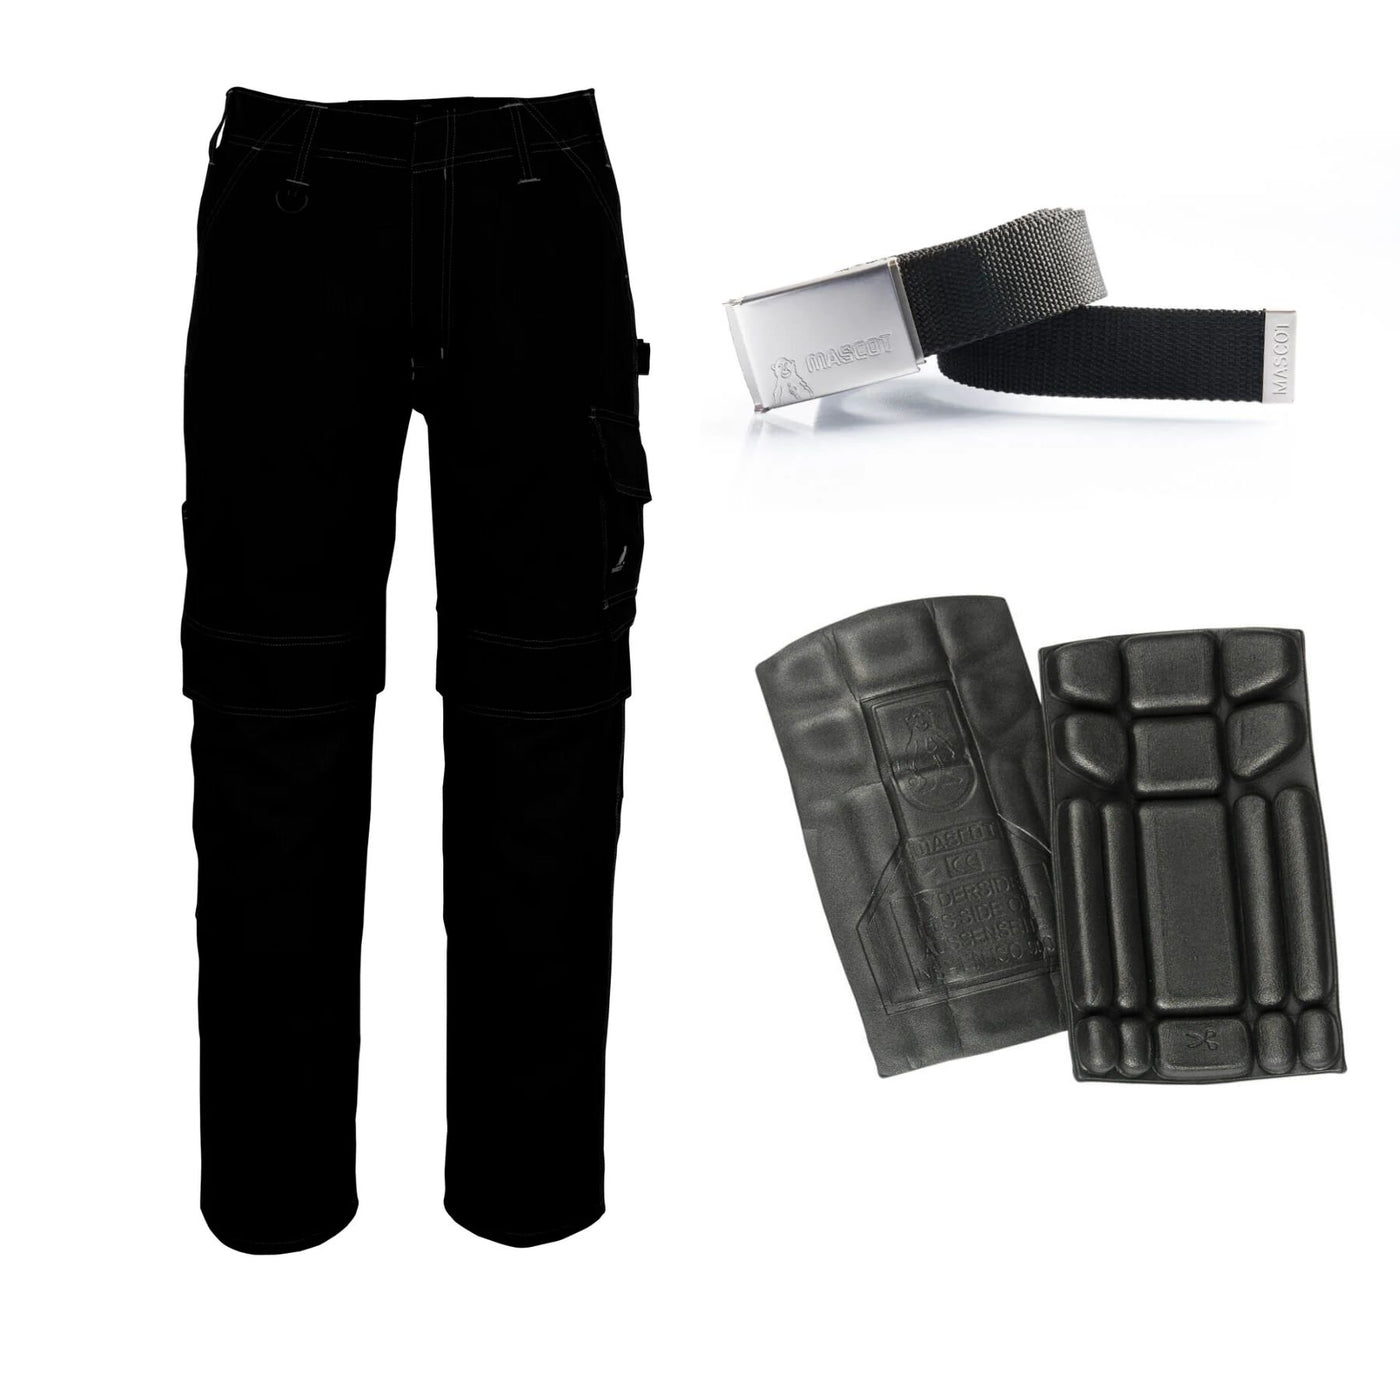 Mascot Special Offer Houston Trousers 10179-154 Pack - Work Pants + Belt + Knee Pads